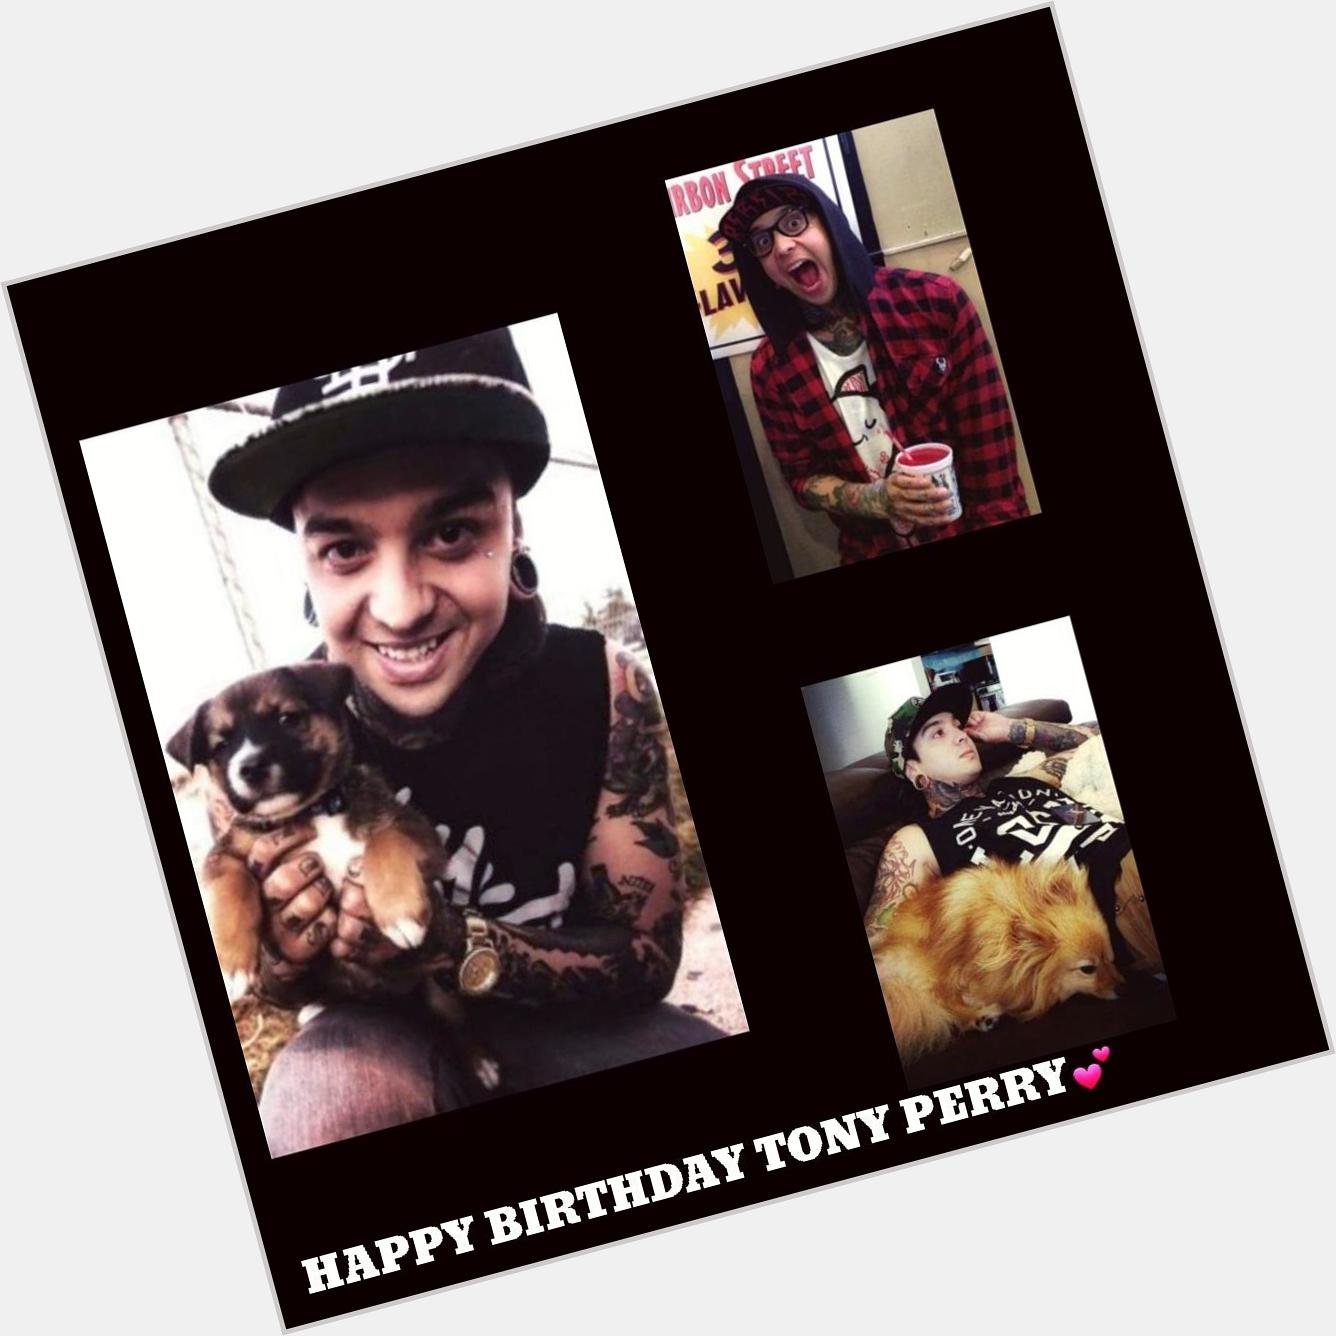 I know this is late Asf, but HAPPY BIRTHDAY TONY PERRY   